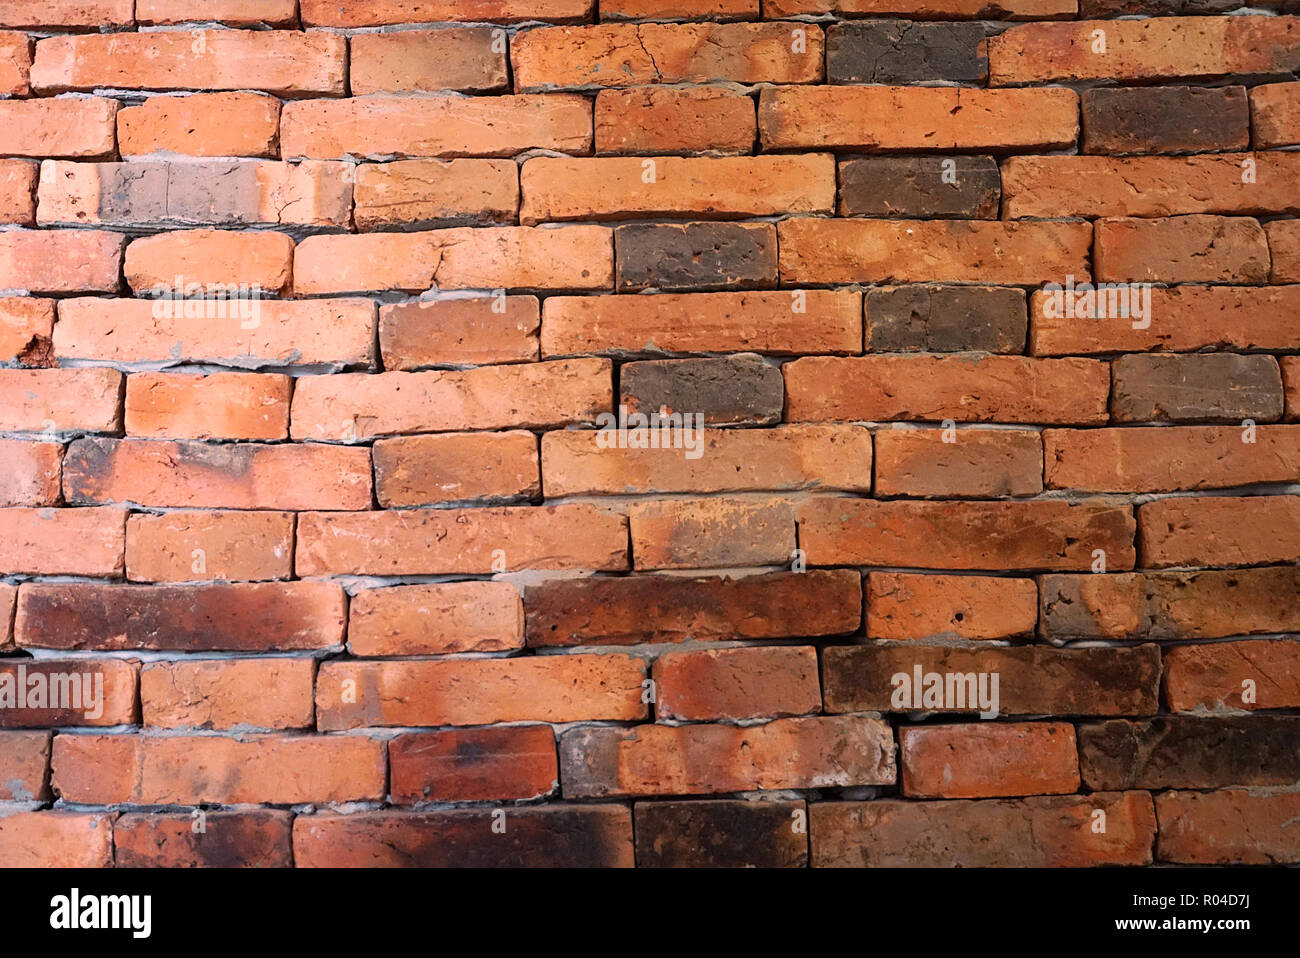 Brick wall background Banque D'Images